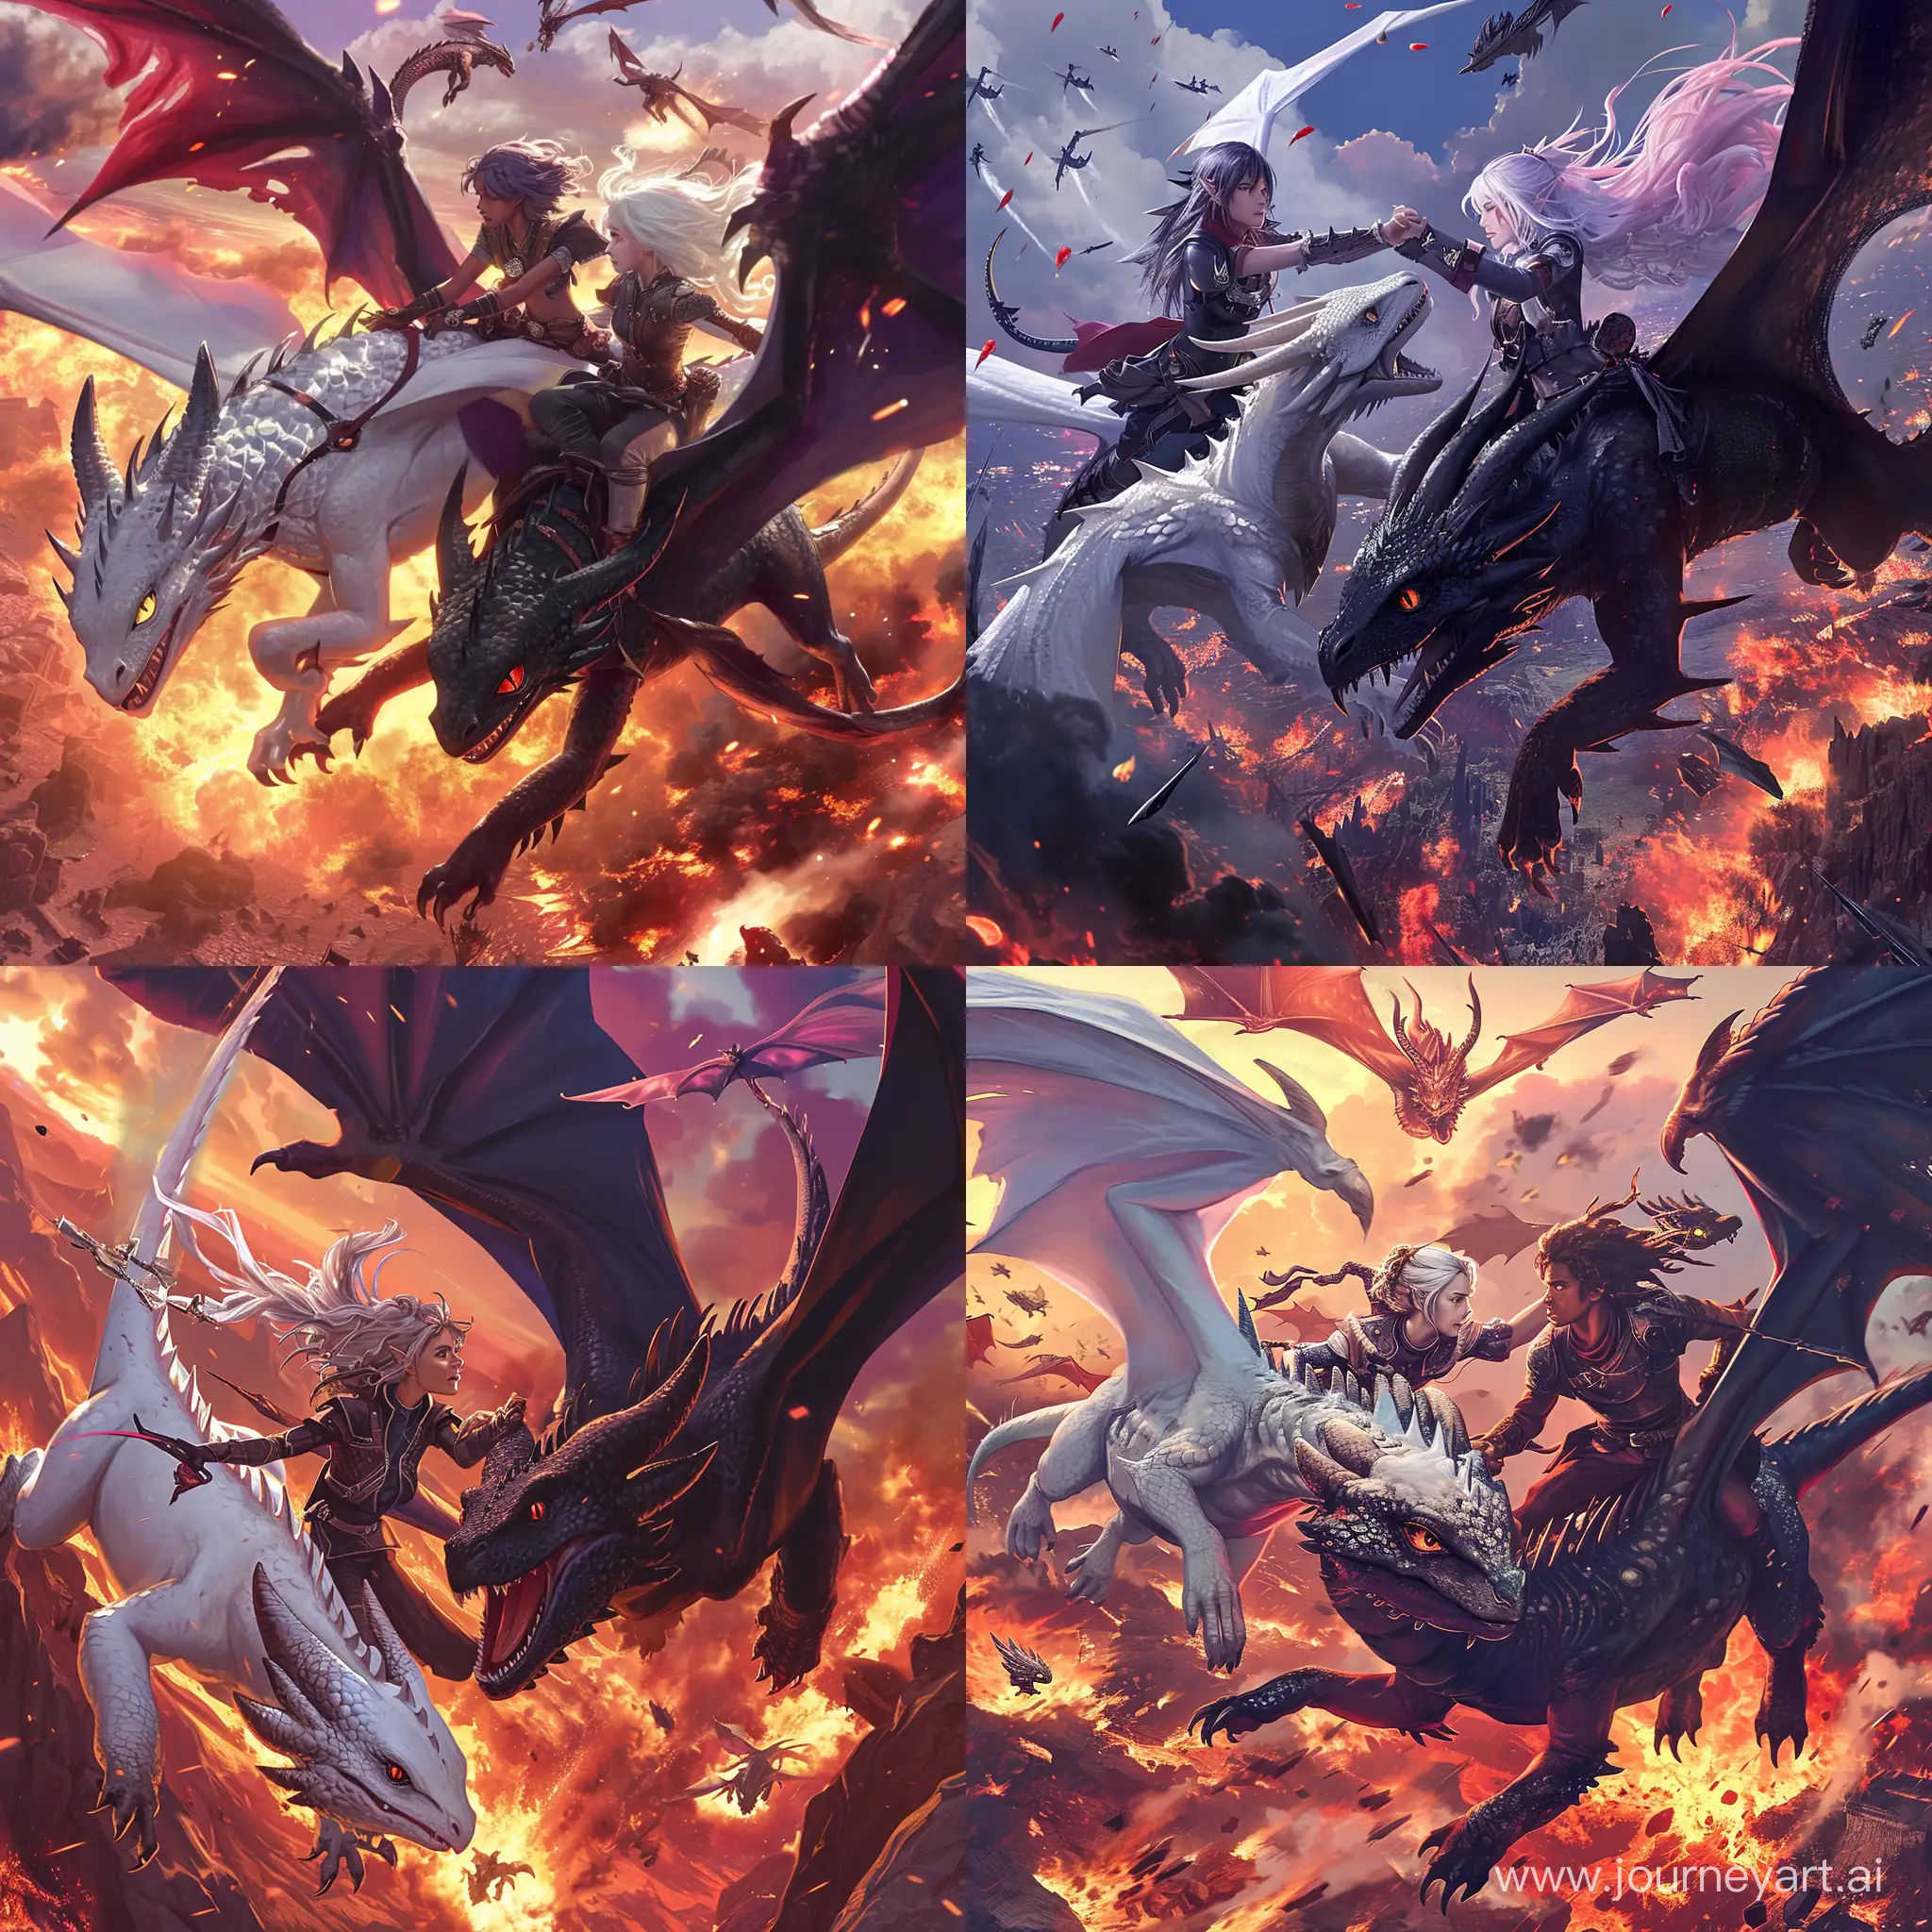 A dramatic scene of Violet and Xaden flying on their dragons over a battlefield, with fire and smoke in the background. Violet’s dragon is white with silver scales, and Xaden’s dragon is black with red eyes. They are holding hands and looking at each other with love and determination, as they prepare to face their enemies